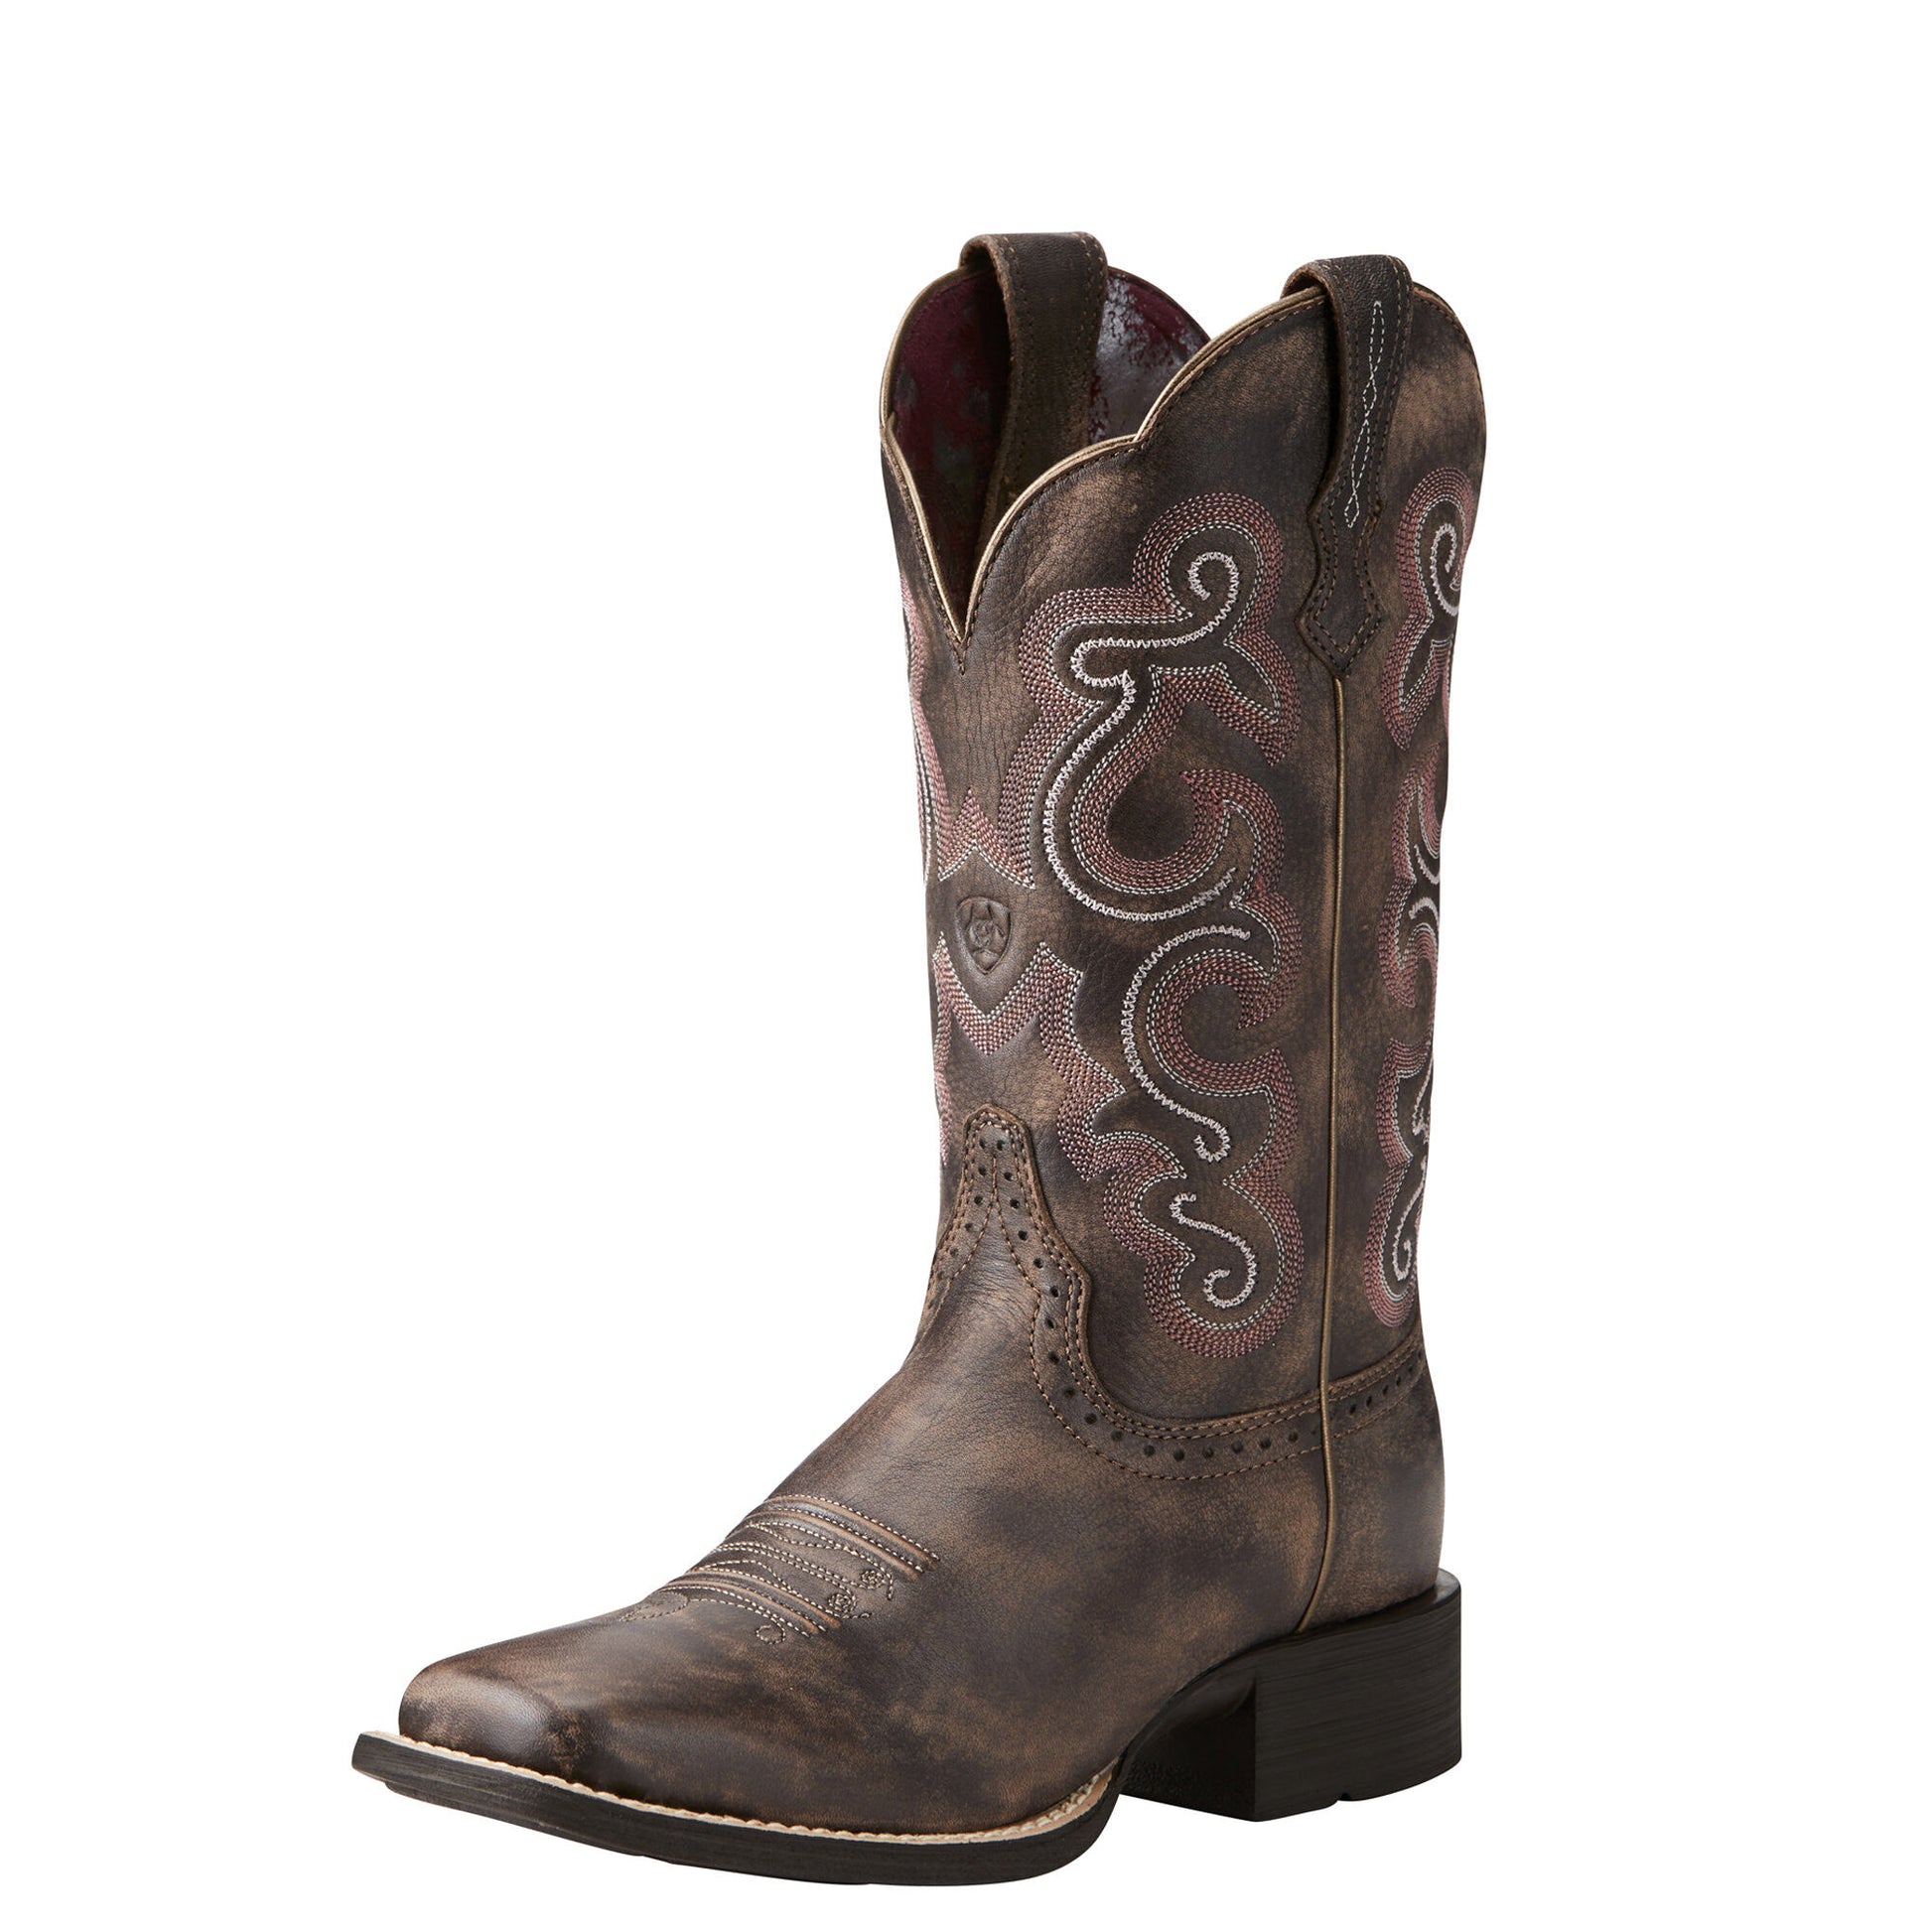 Ariat Women's Quickdraw Boot - Tack Room Chocolate - French's Boots